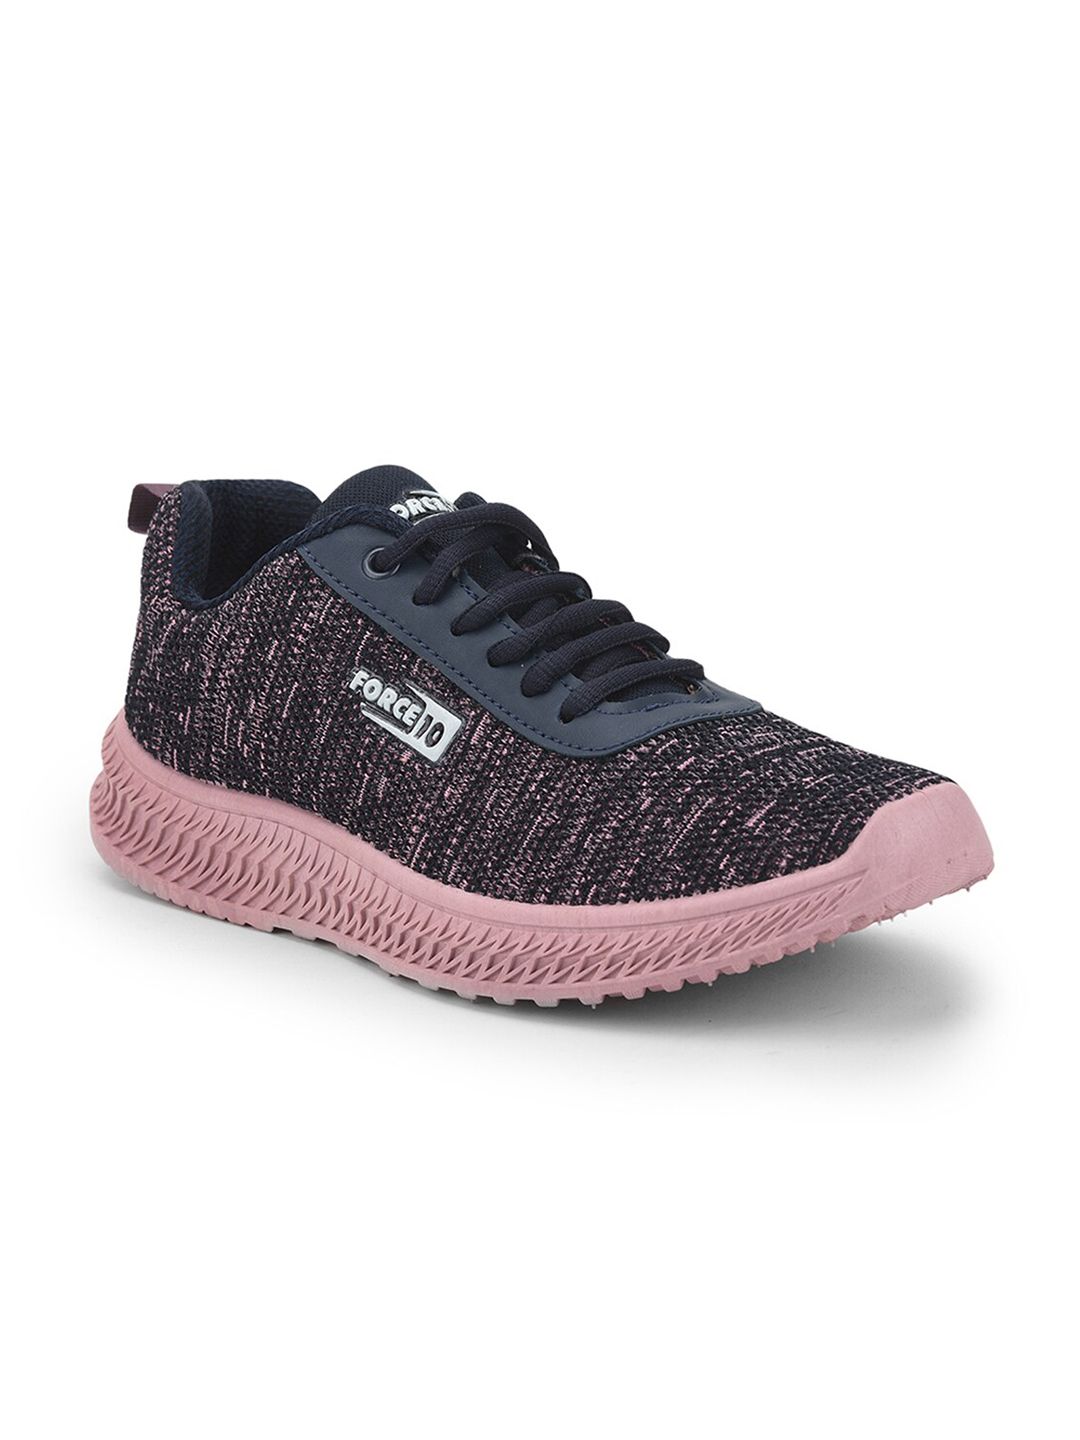 Liberty Women Blue Mesh Running Non-Marking Shoes Price in India